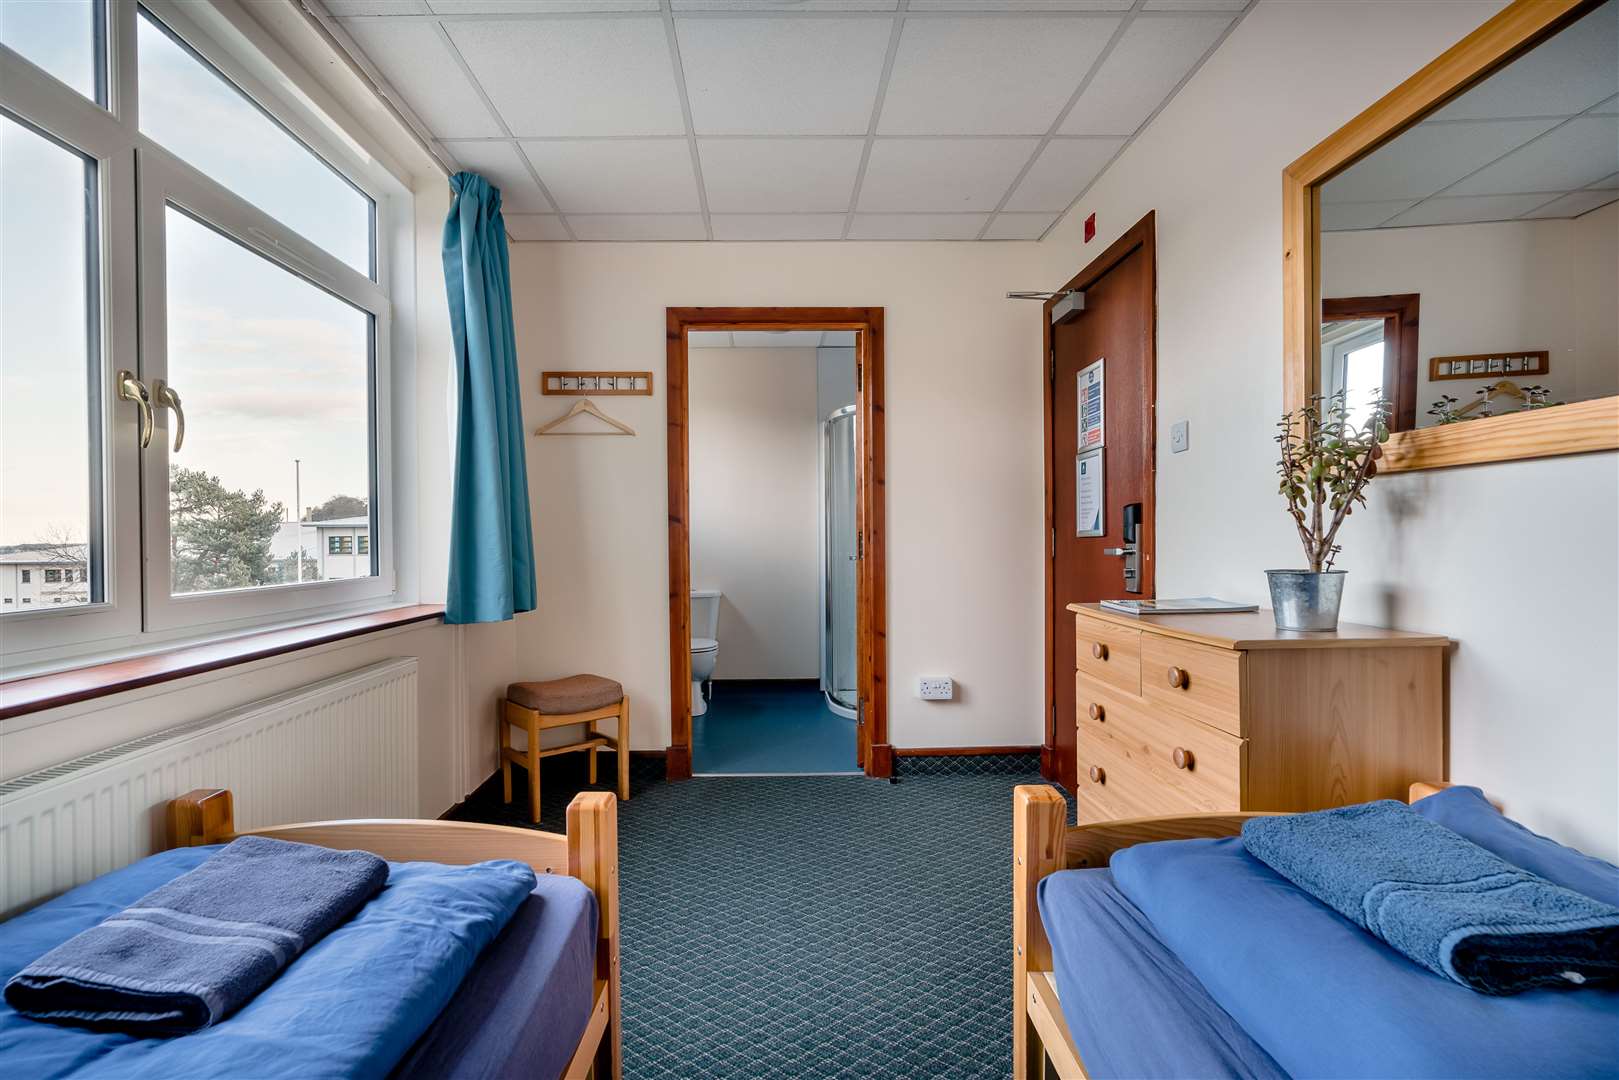 A private room at Inverness hostel.